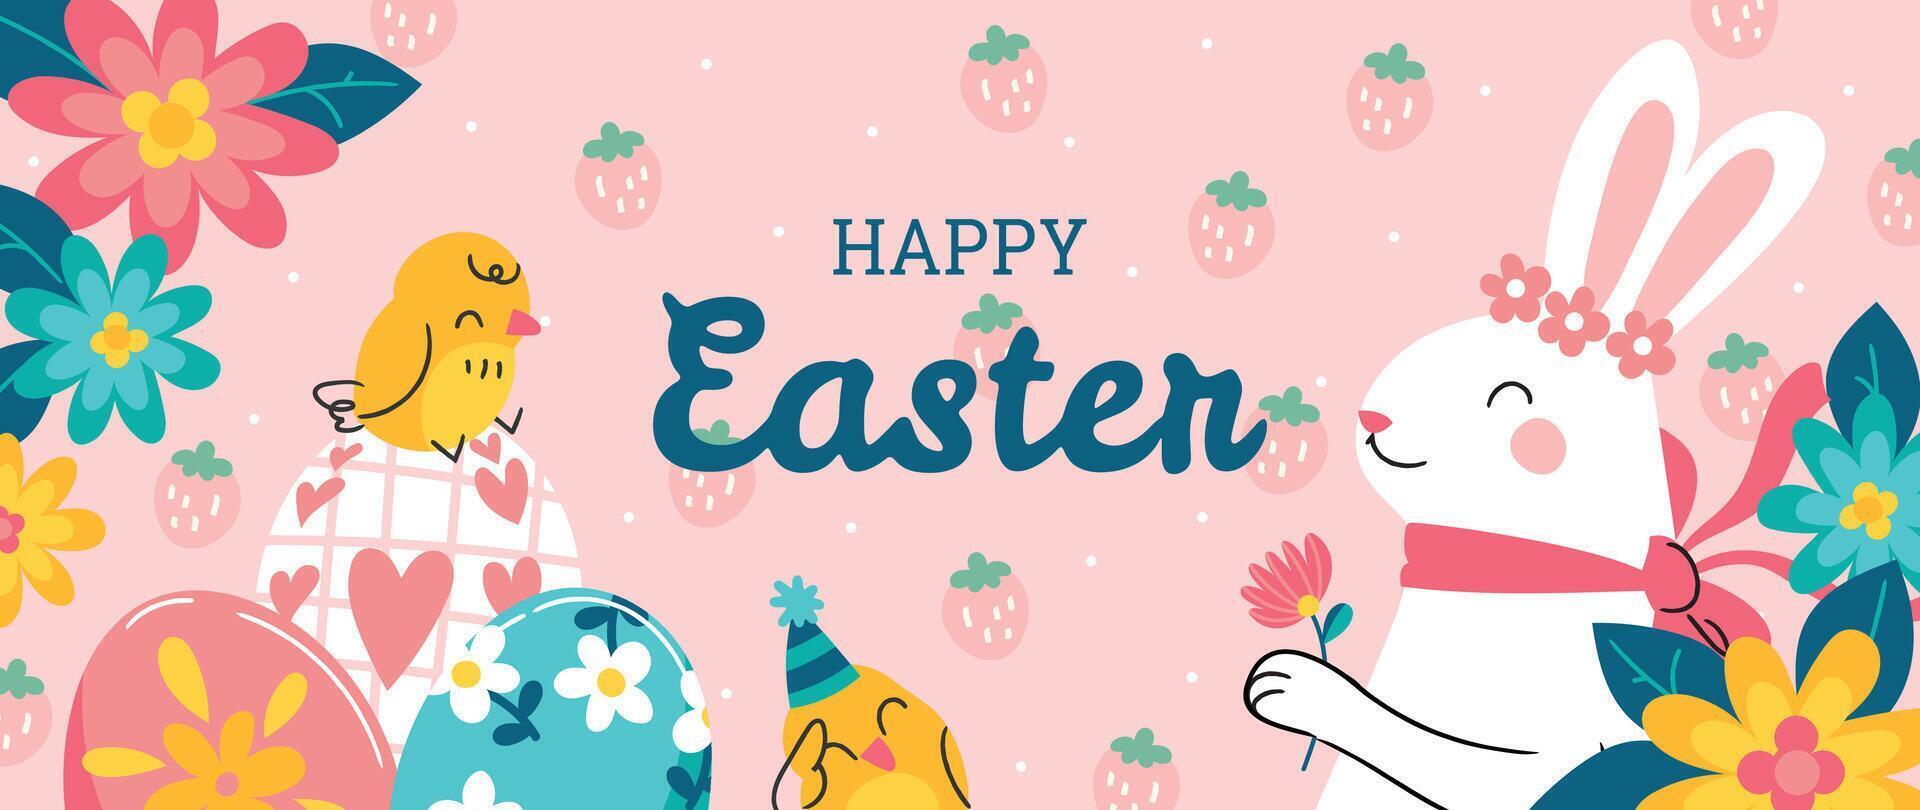 Happy Easter element background vector. Hand drawn cute white rabbit, easter egg, flower, leaf, chick on pink background. Collection of adorable doodle design for decorative, card, kids, banner. vector